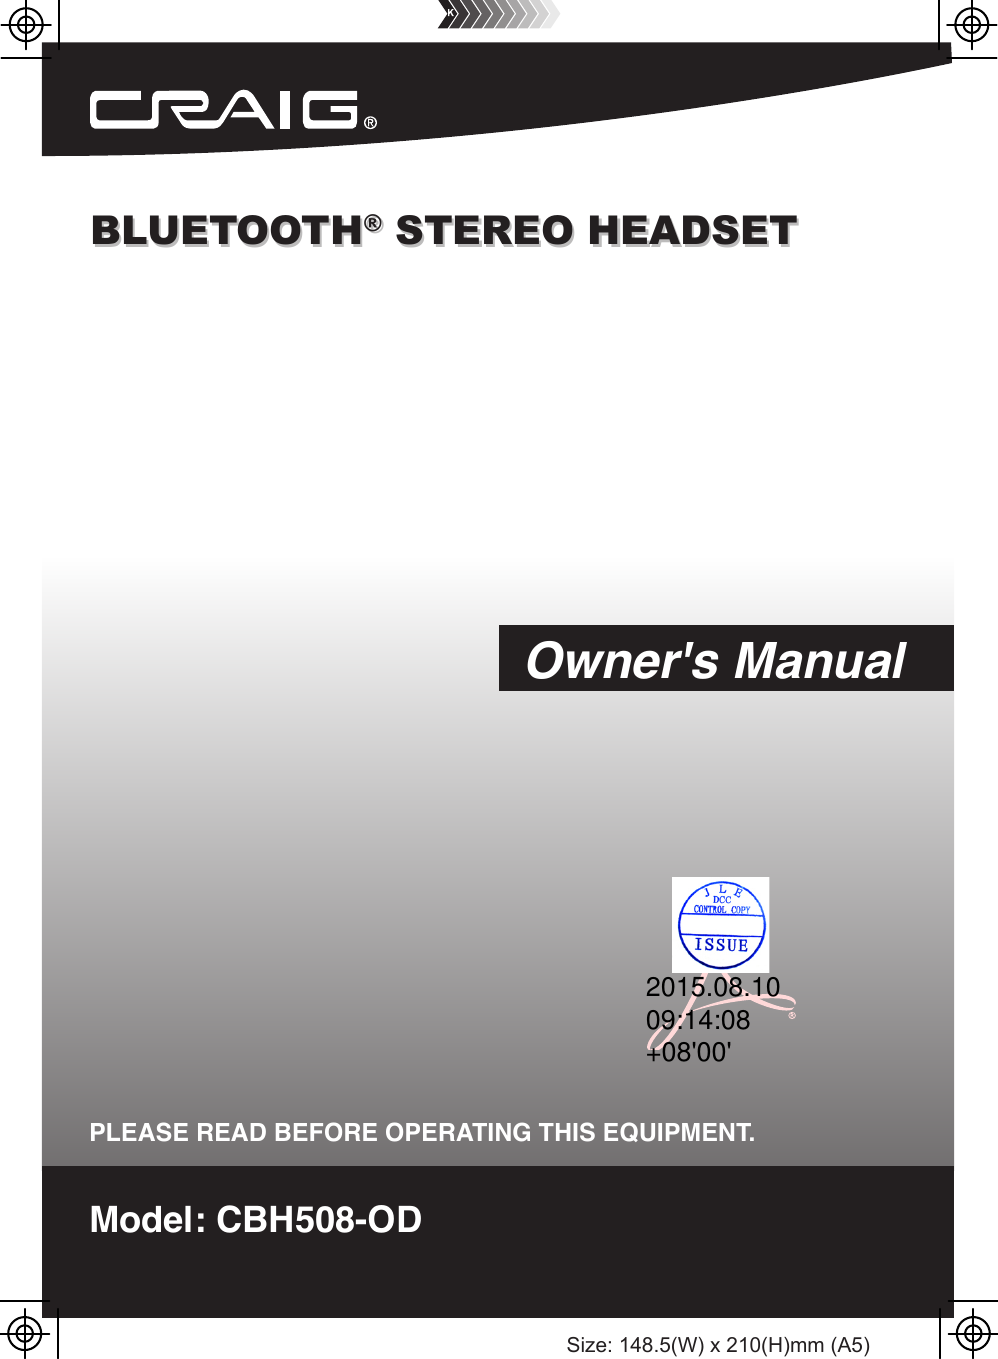 Size: 148.5(W) x 210(H)mm (A5)BLUETOOTH® STEREO HEADSETBLUETOOTH® STEREO HEADSETModel: CBH508-ODPLEASE READ BEFORE OPERATING THIS EQUIPMENT.Owner&apos;s Manual2015.08.1009:14:08+08&apos;00&apos;